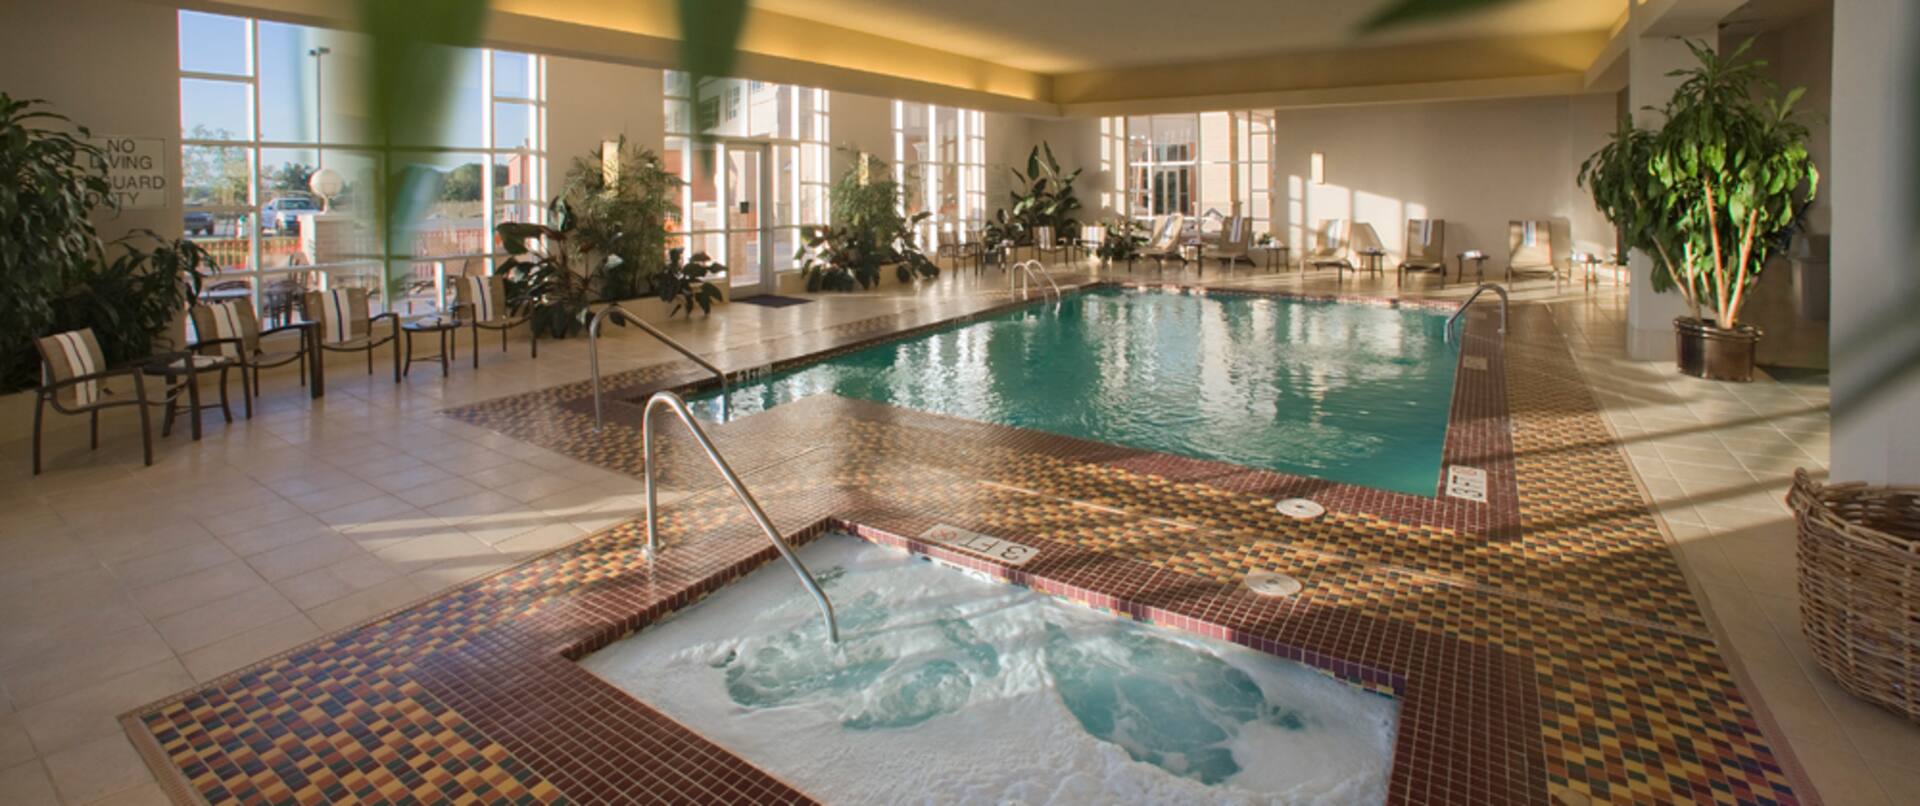 Indoor Whirlpool and Pool